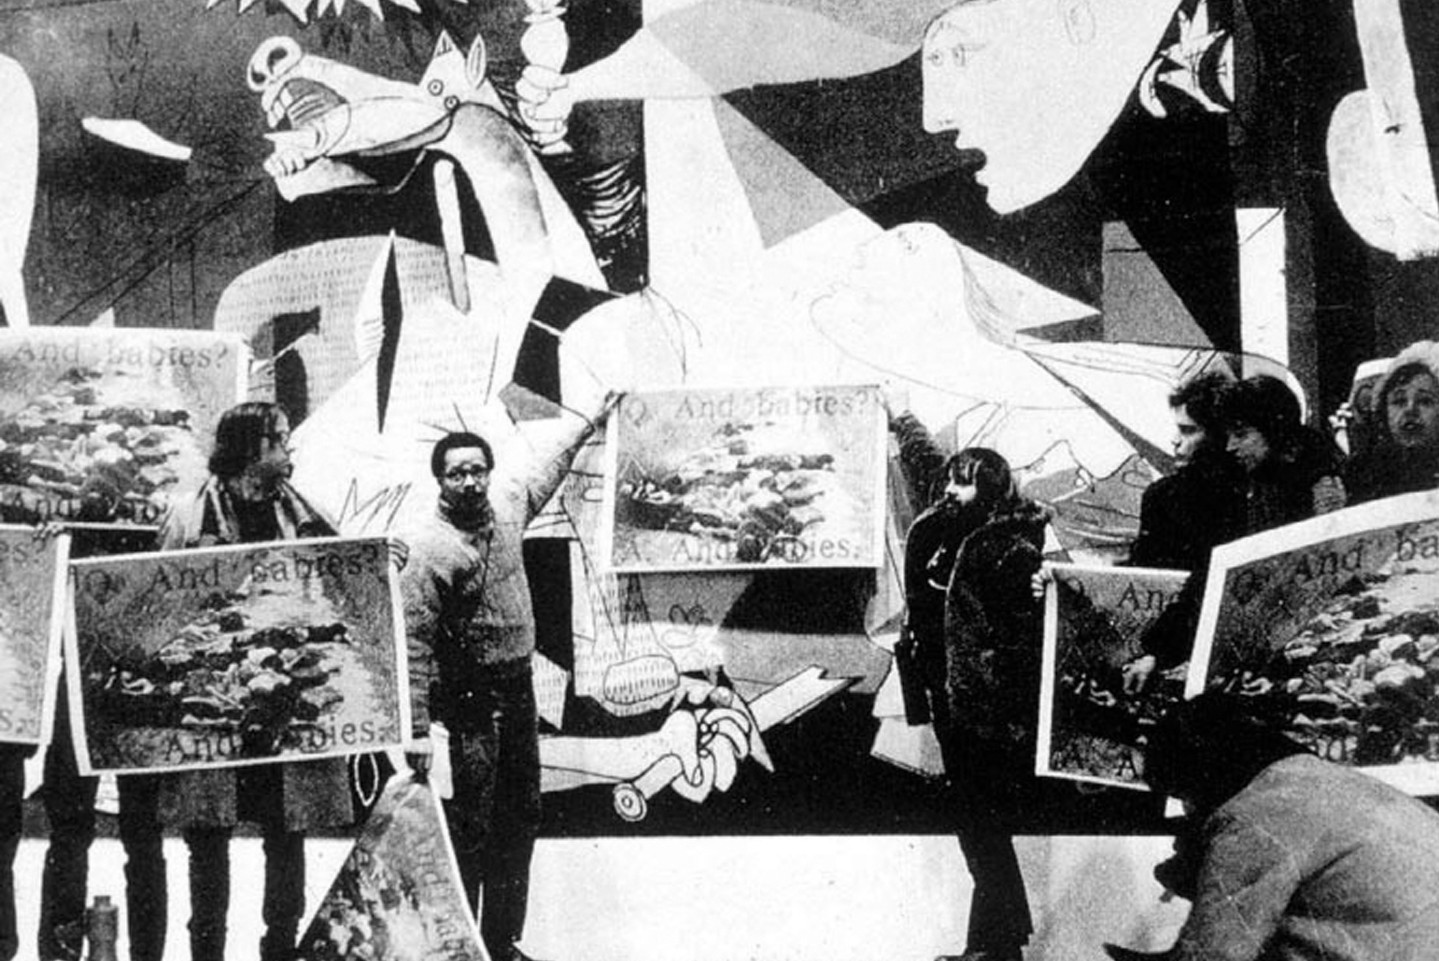 http://moussemagazine.it/app/uploads/02-art-workers-coalition_protest-in-front-of-picasso-s-guernica_moma-ny_1970-e1479816380742.jpg